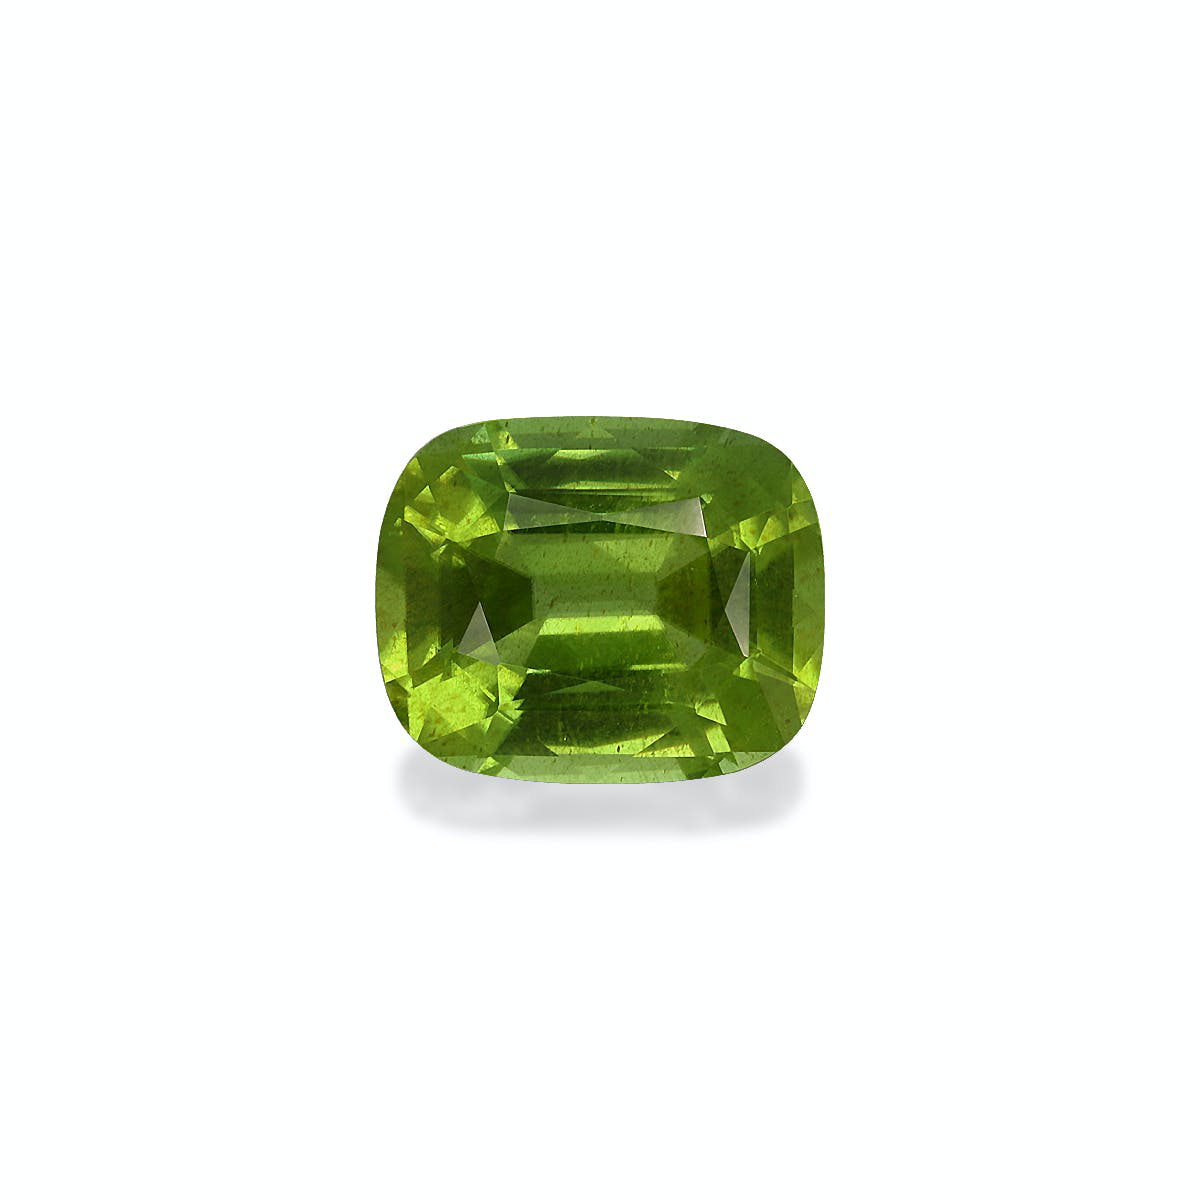 Picture of Pistachio Green Peridot 5.89ct - 12x10mm (PD0071)